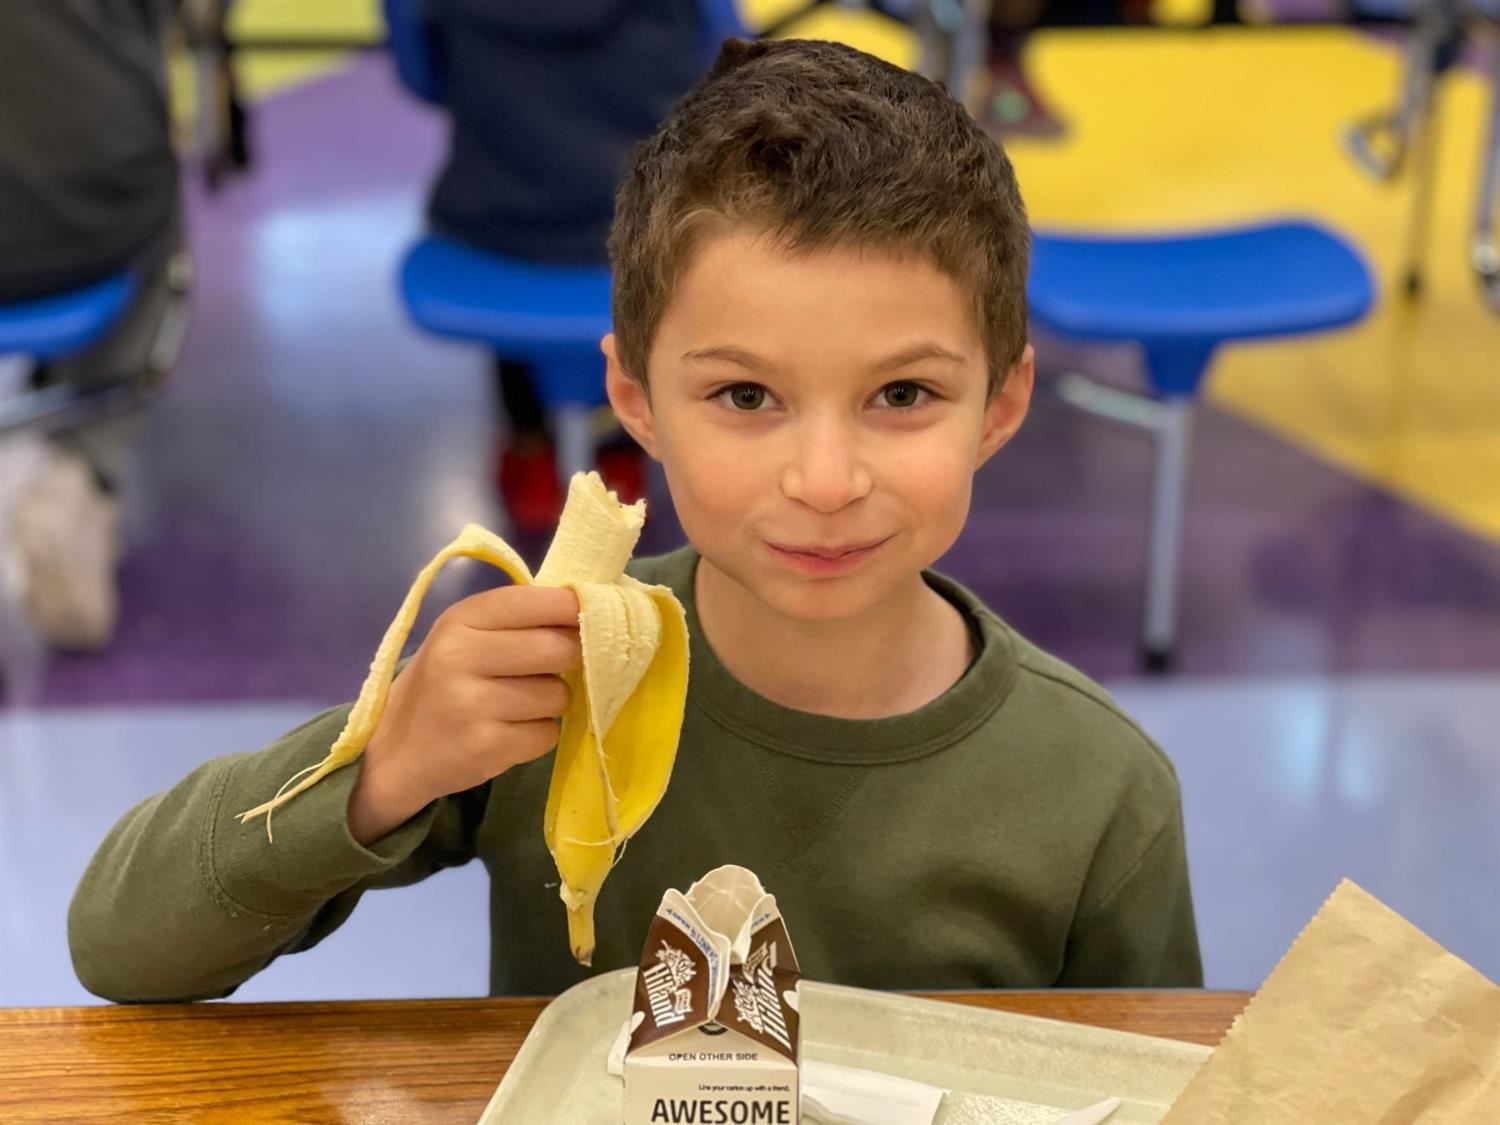 Smiling Elementary student with a banana in a school cafeteria.